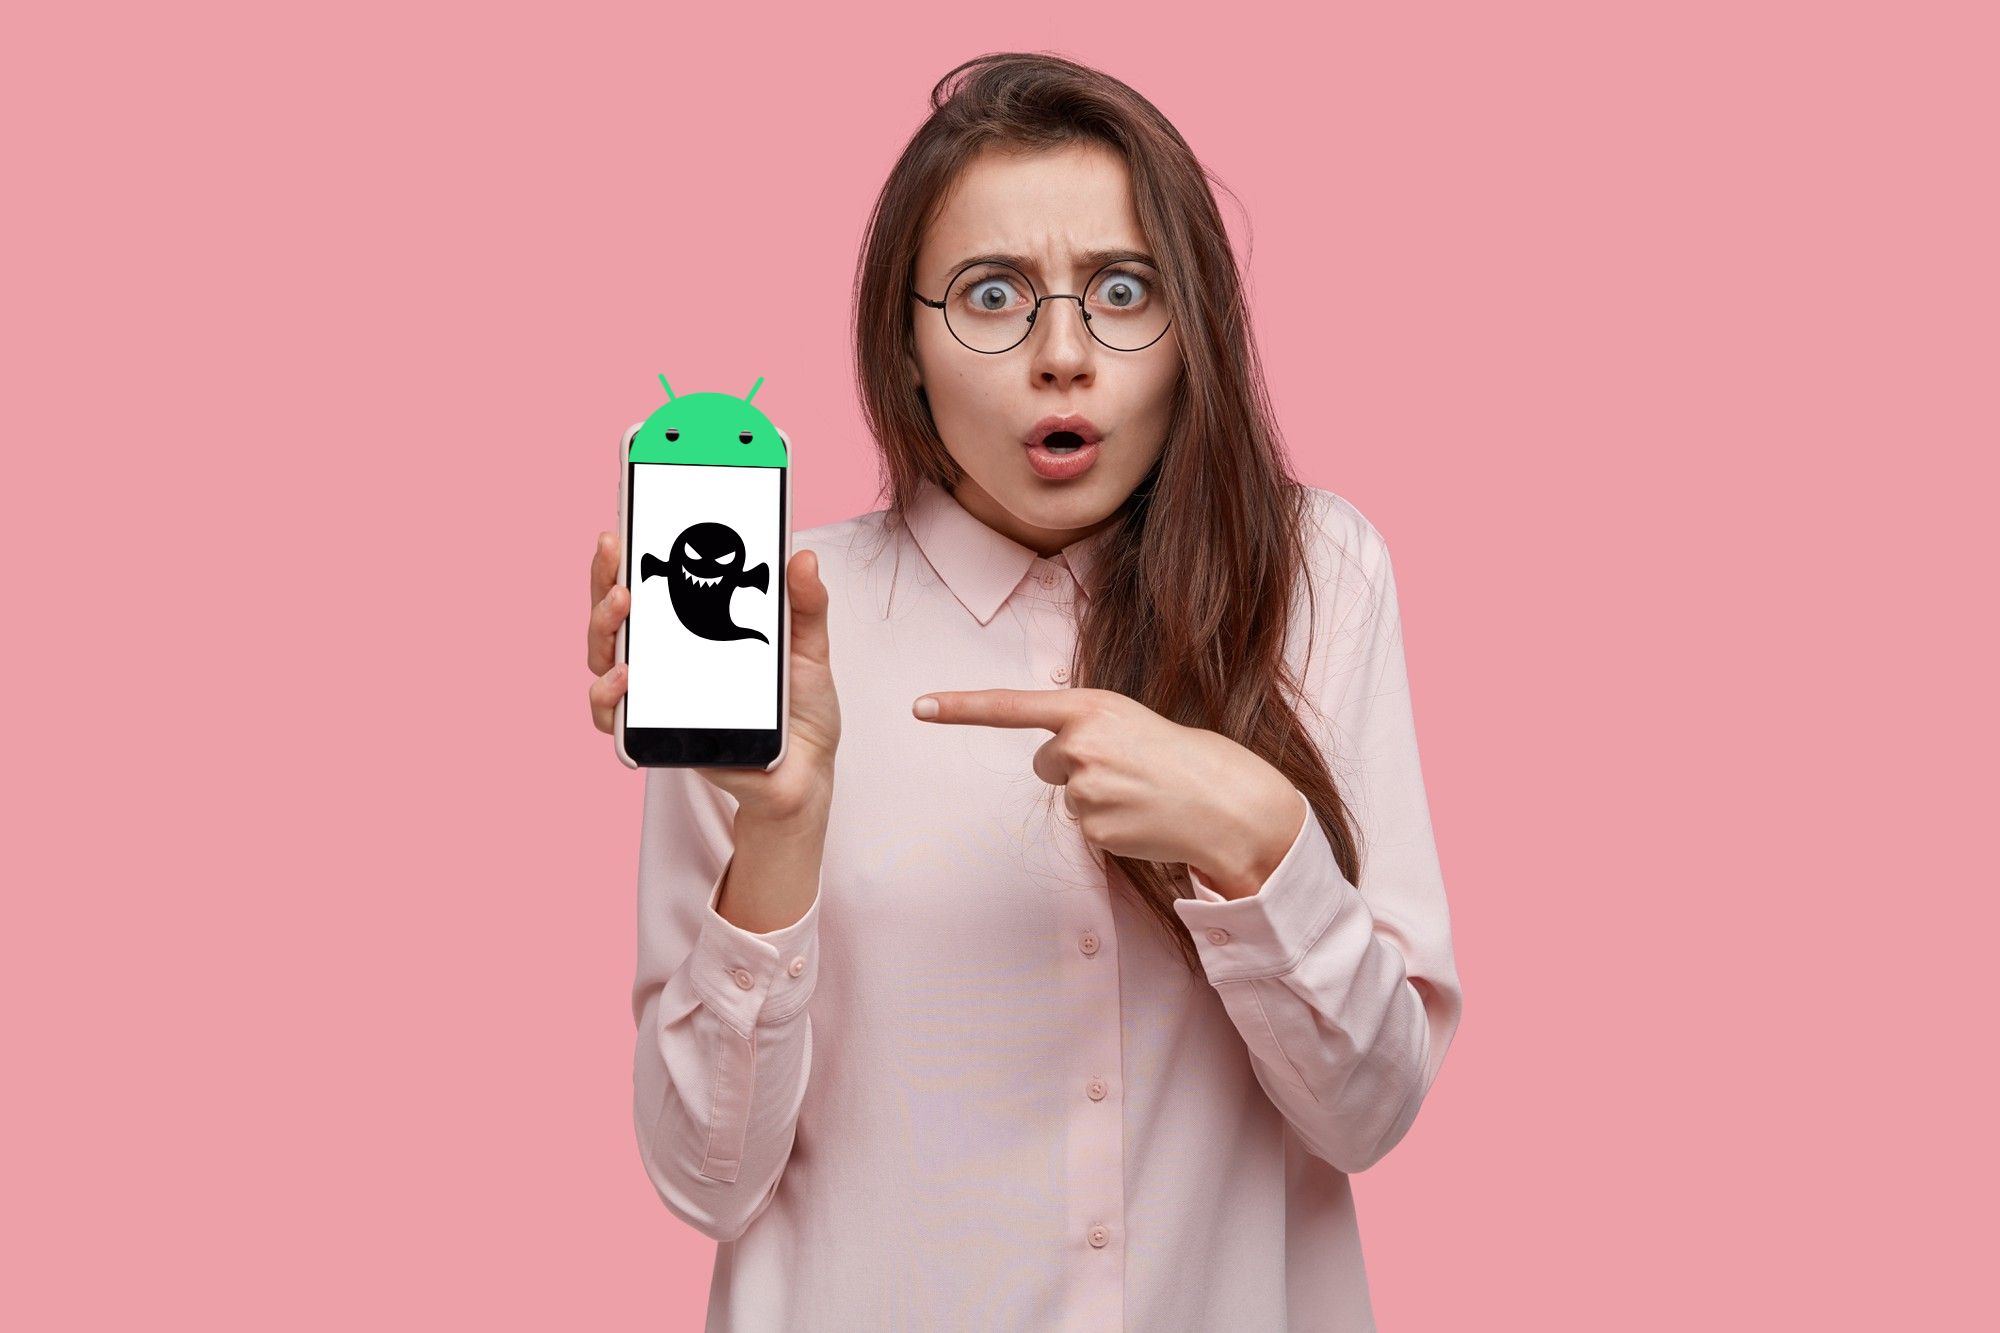 How to fix ghost touch on Android phones: This photo shows a woman is holding an Android phone that is having ghost touch issues.